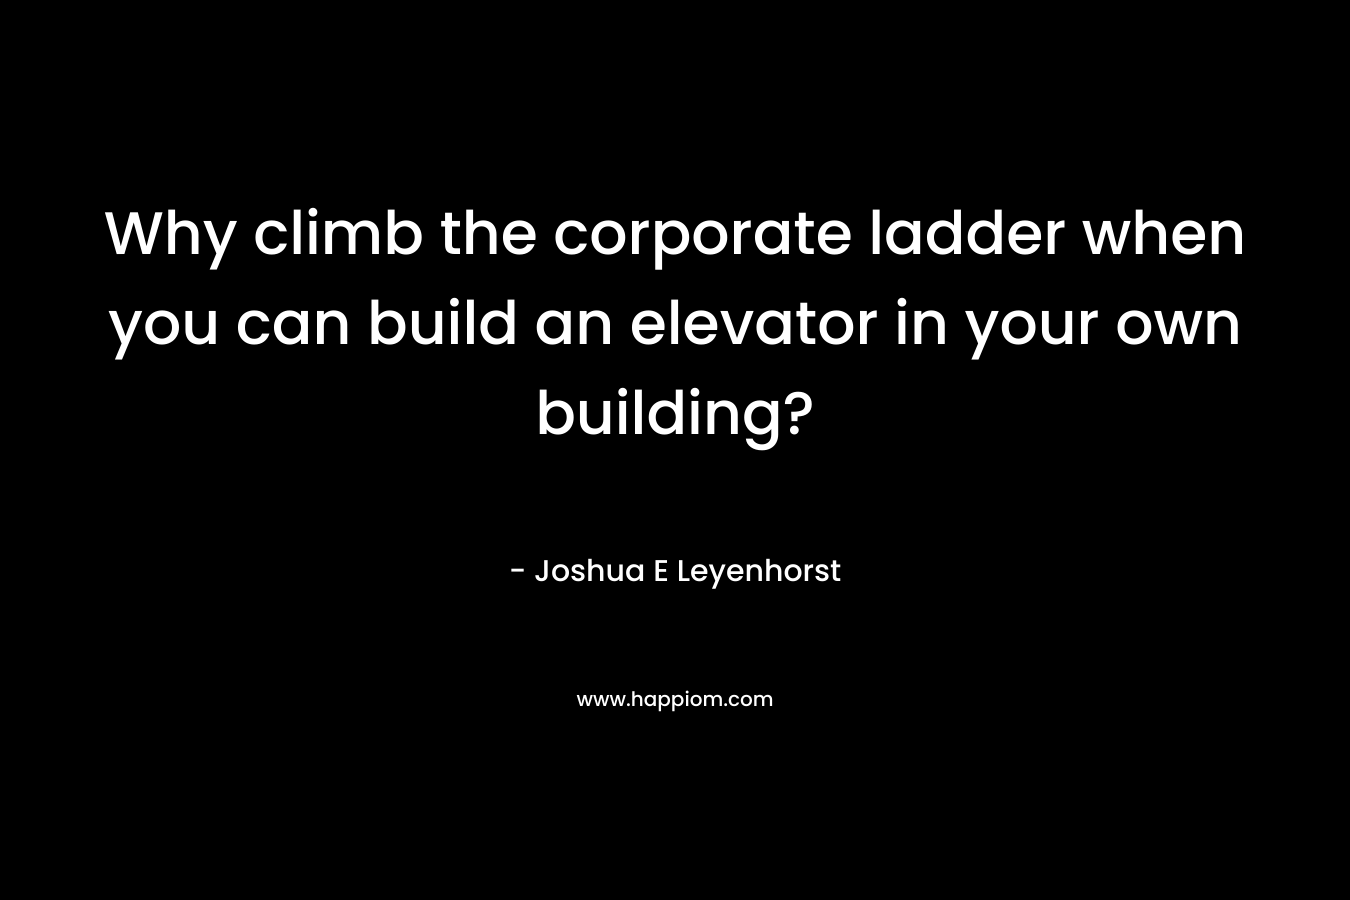 Why climb the corporate ladder when you can build an elevator in your own building? – Joshua E Leyenhorst